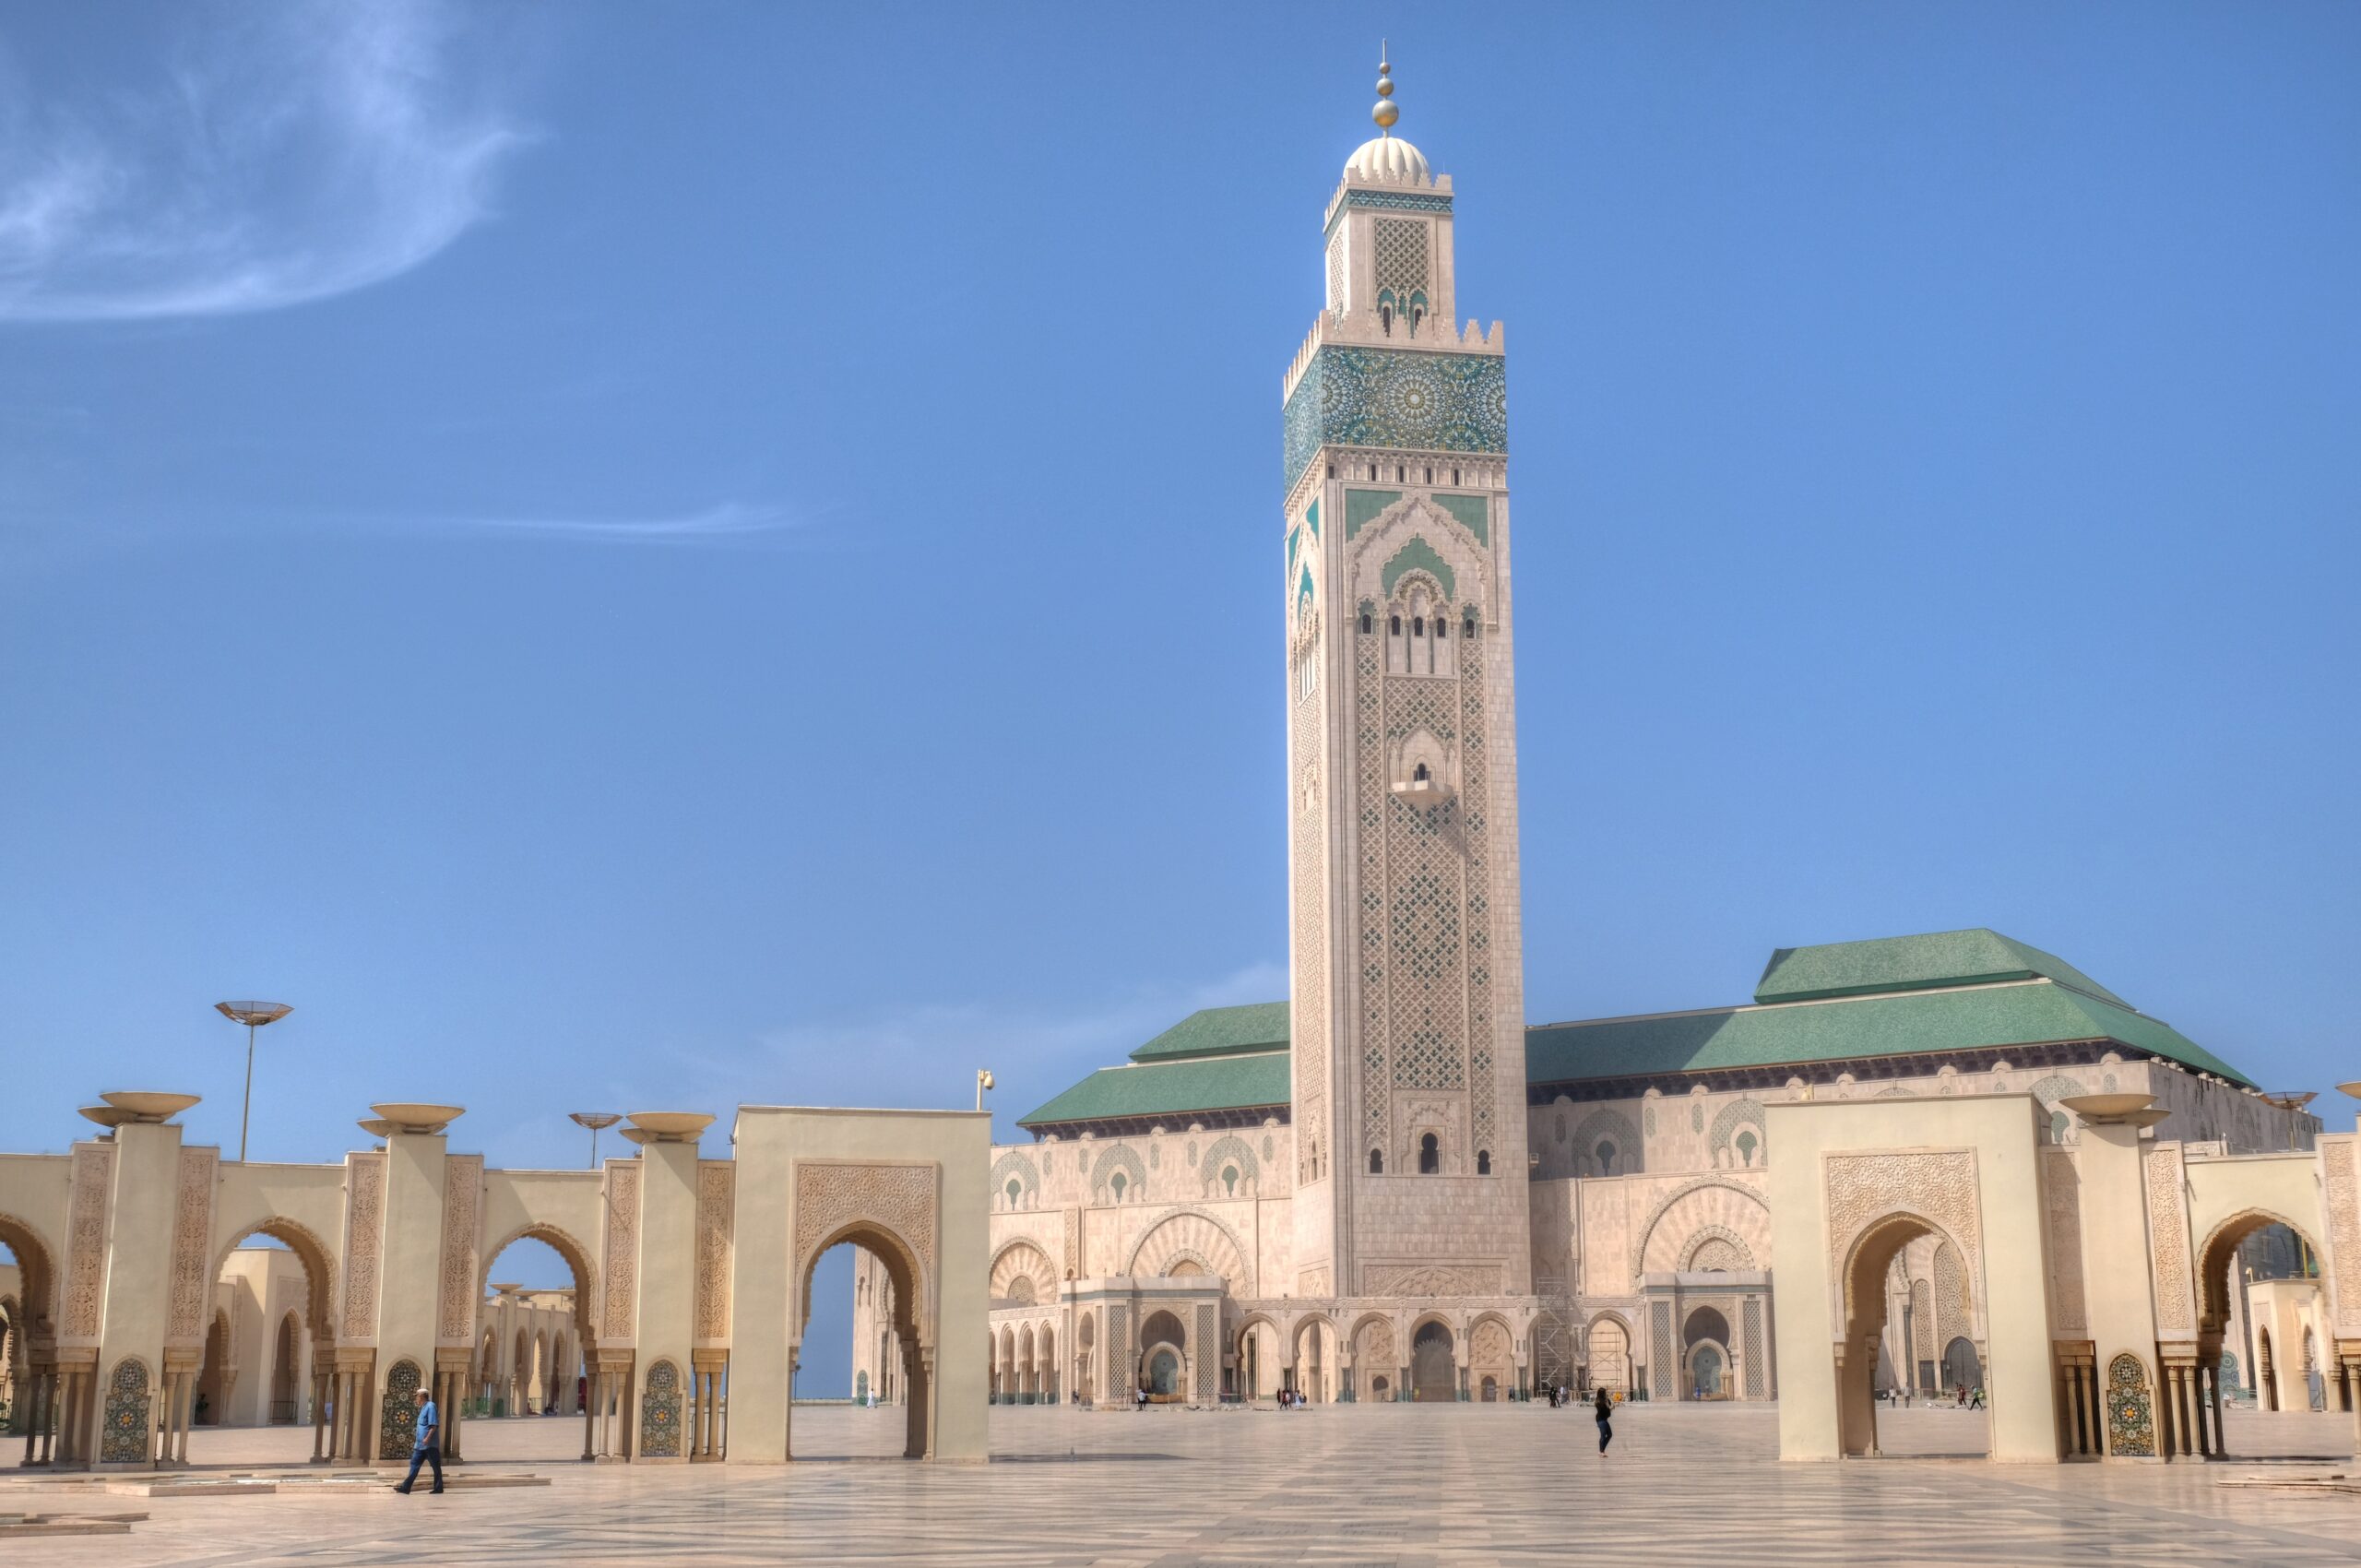 See The Best Of Casablanca On Our Casablanca Private Tour From Rabat